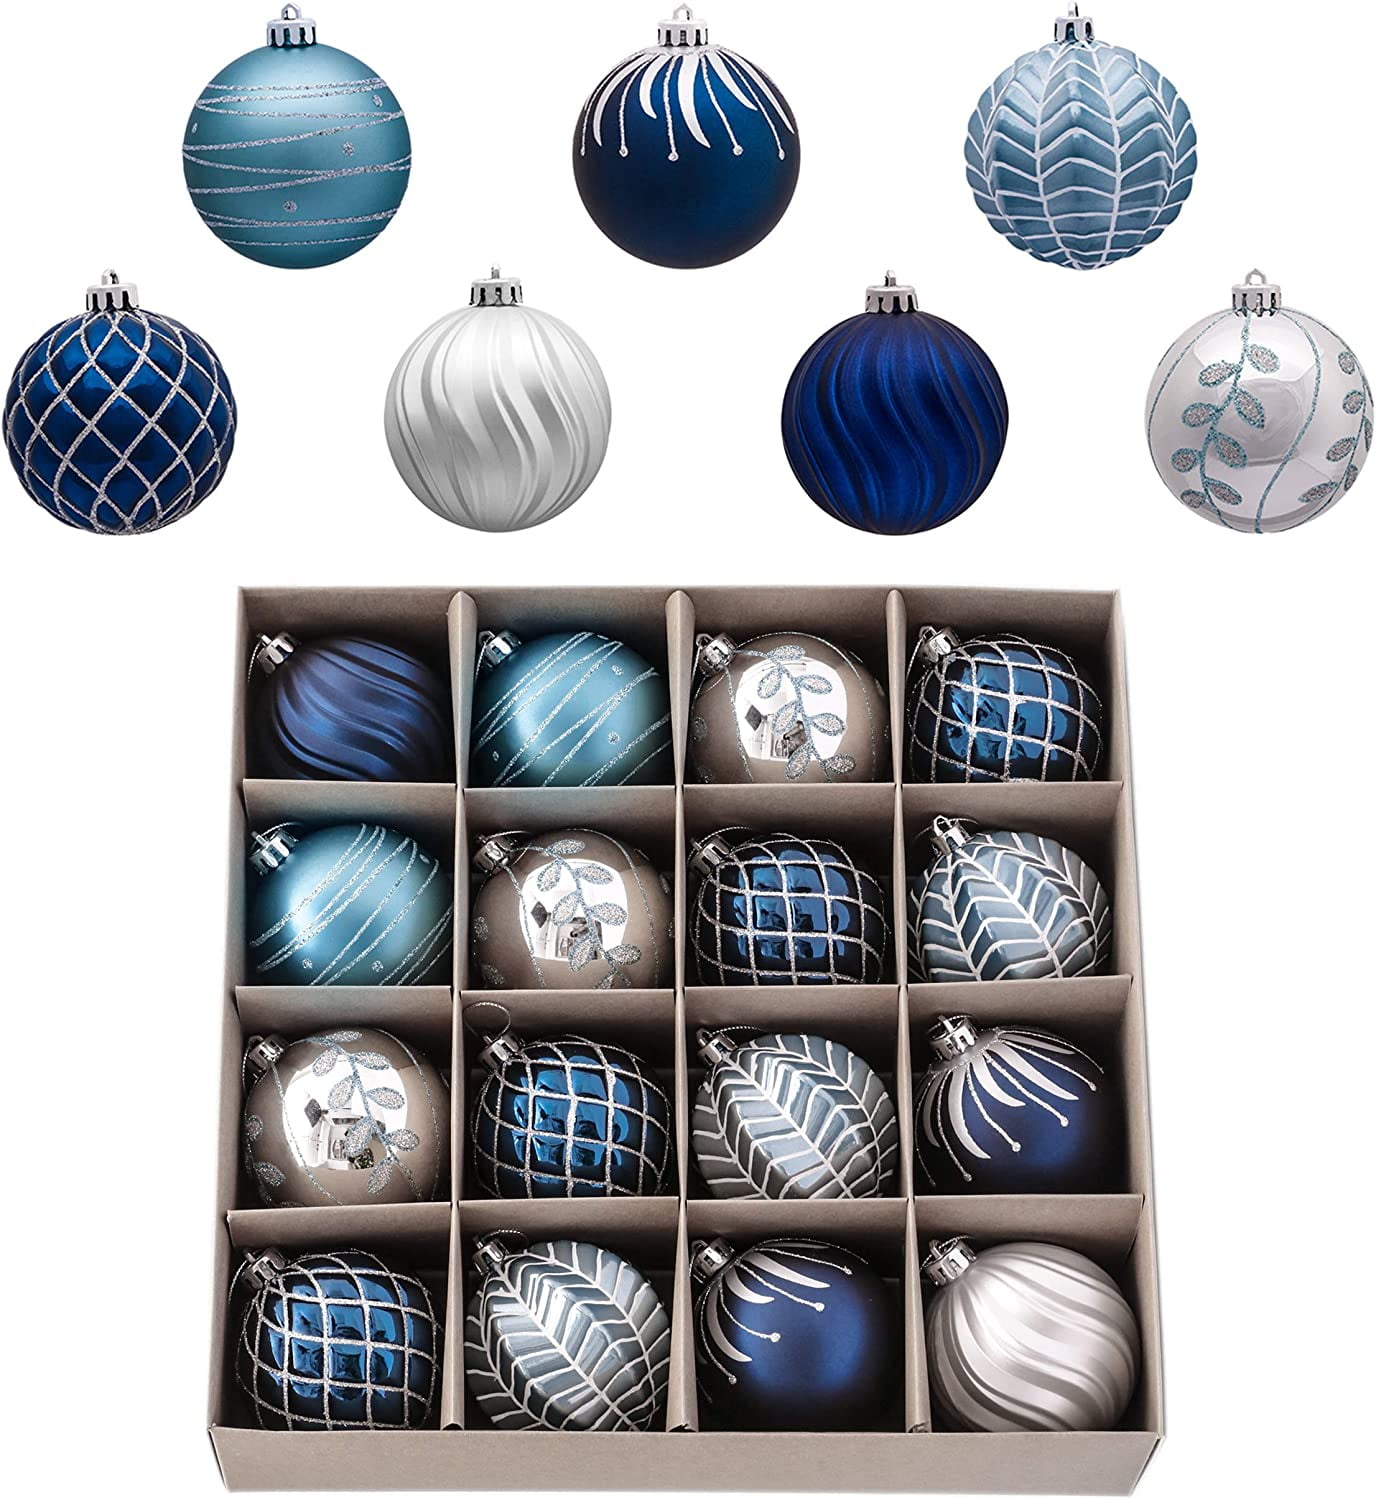 Valery Madelyn 16ct 80mm Winter Wishes Silver and Blue Christmas Ball  Ornaments, Shatterproof Christmas Tree Ornaments, Hanging Baubles for Xmas 